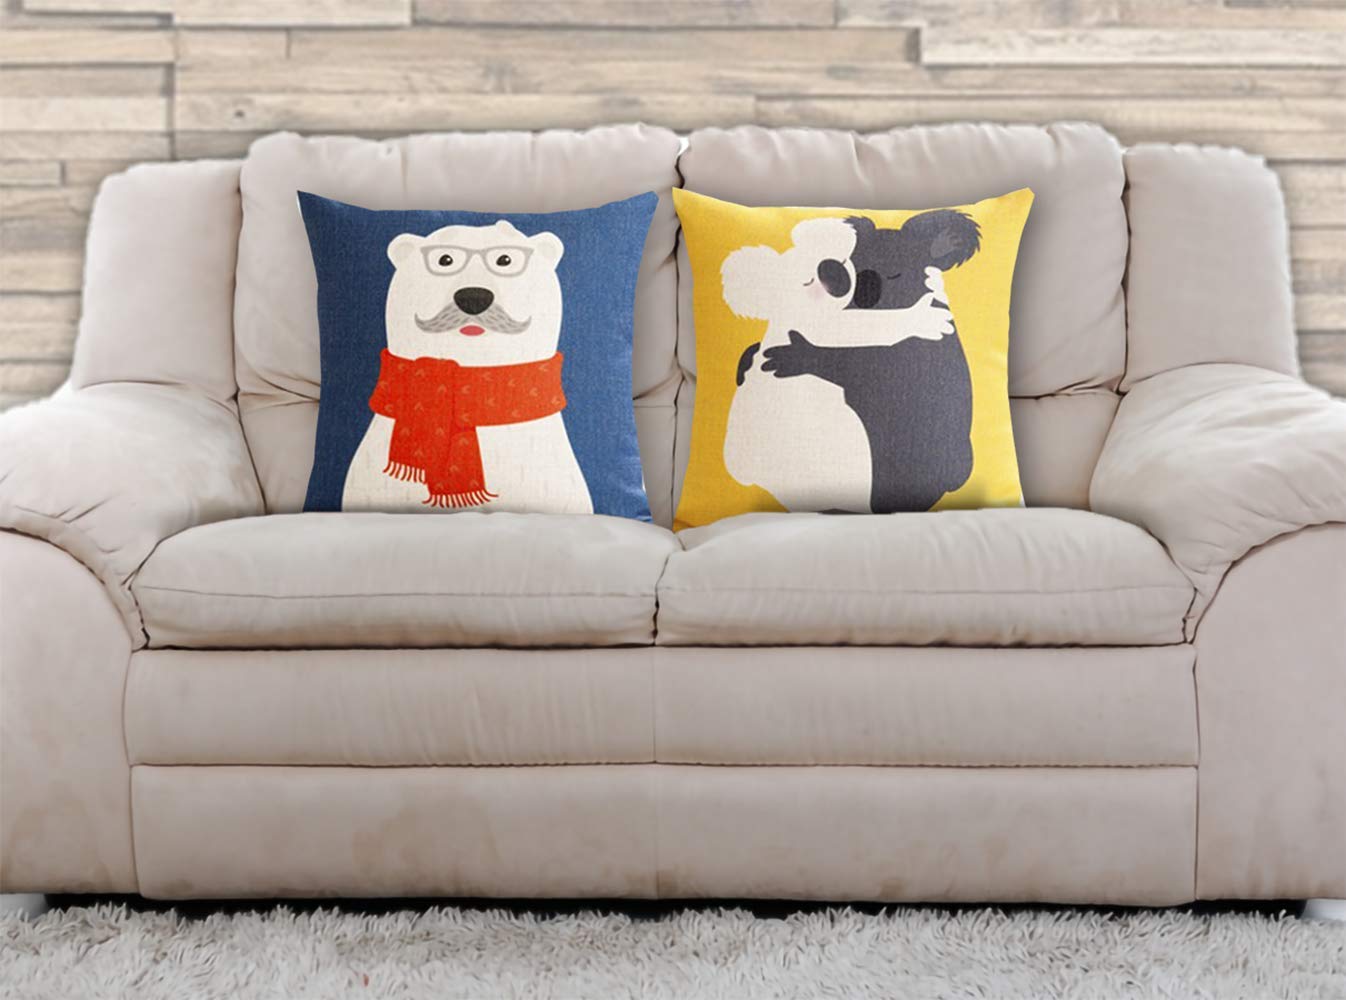 AAYU Animal Decorative Throw Pillow Covers 18 x 18 Inch Set of 2 Linen Cushion Covers for Couch Sofa Bed Home Decor